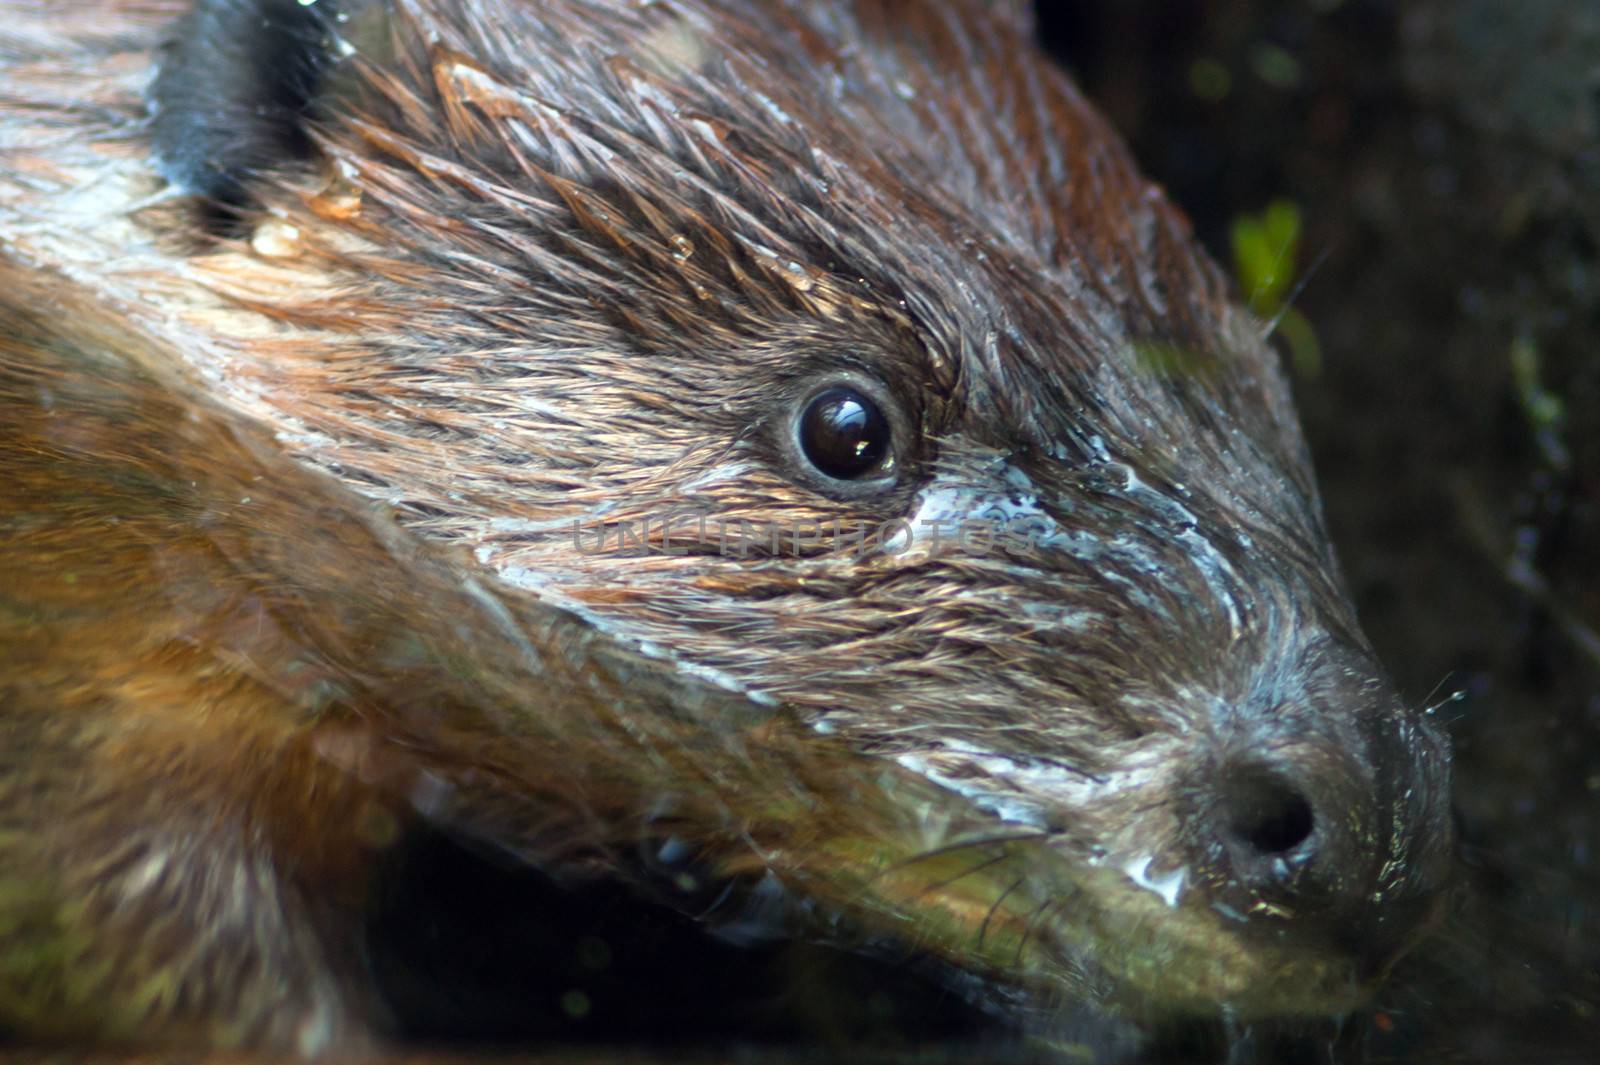 Extreme Animal Close Up Beaver Head Nocturnal Semi Aquatic Roden by ChrisBoswell